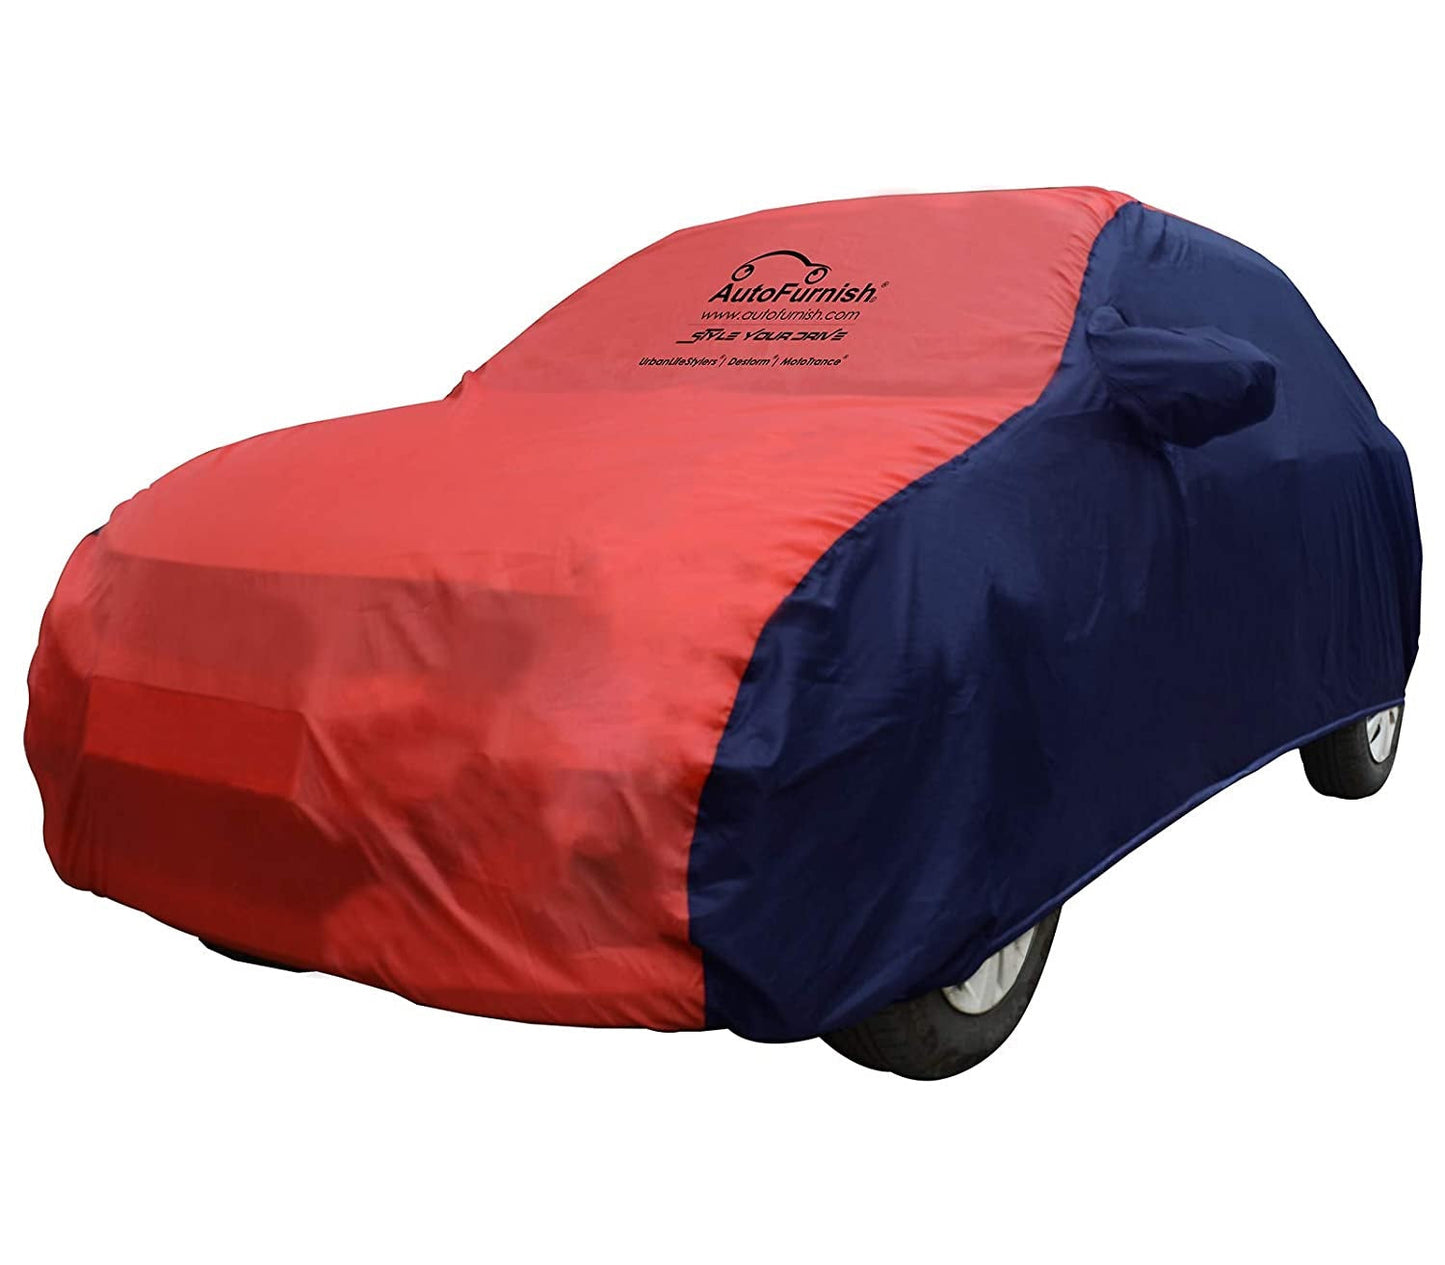 Mahindra Thar (2020) Car Body Cover, Triple Stitched, Heat & Water Resistant with Side Mirror Pockets (SPORTY Series)